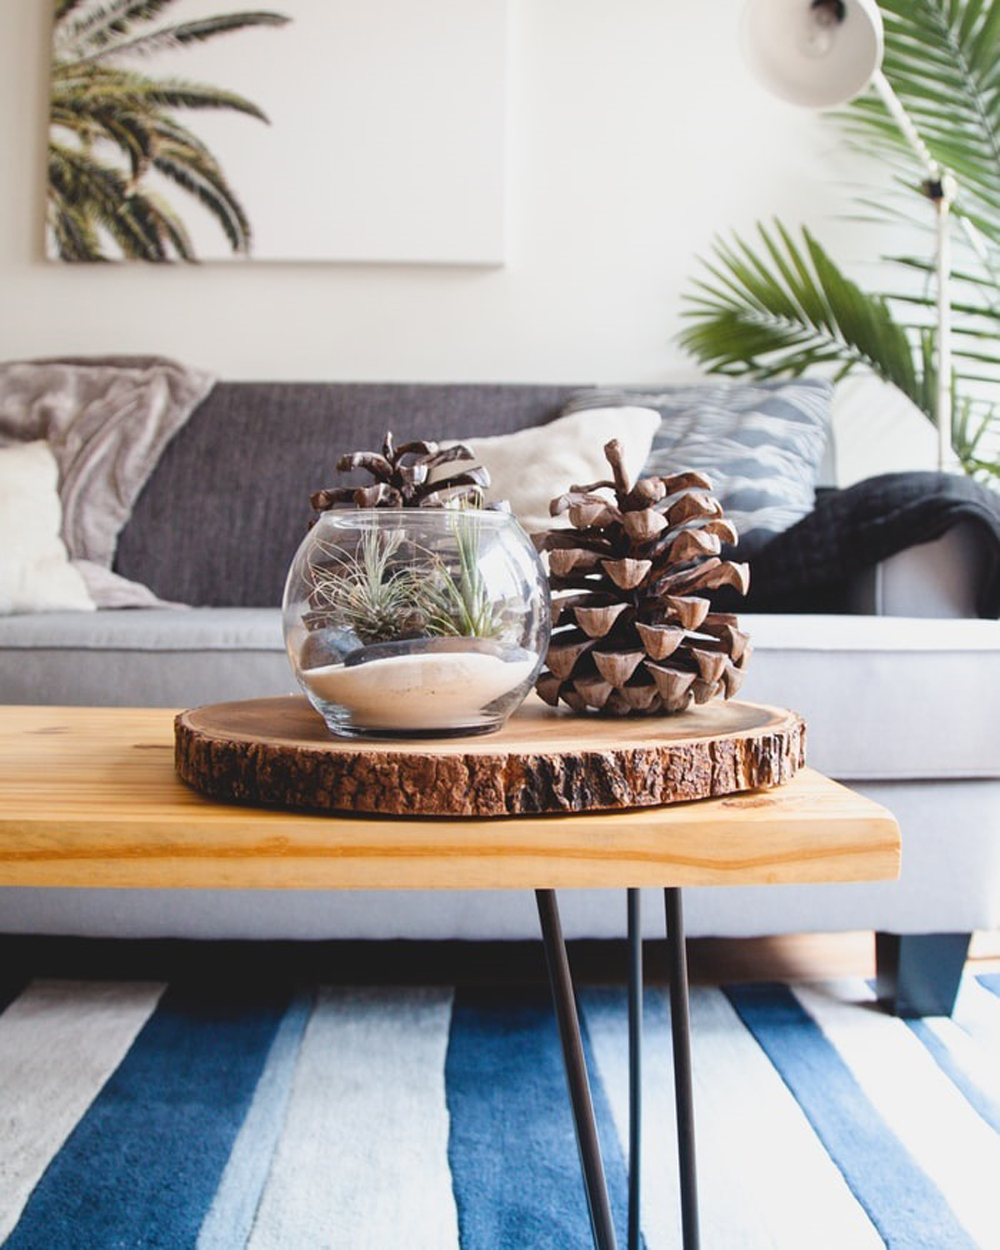 Decorative pine cones on a coffee table in a living room